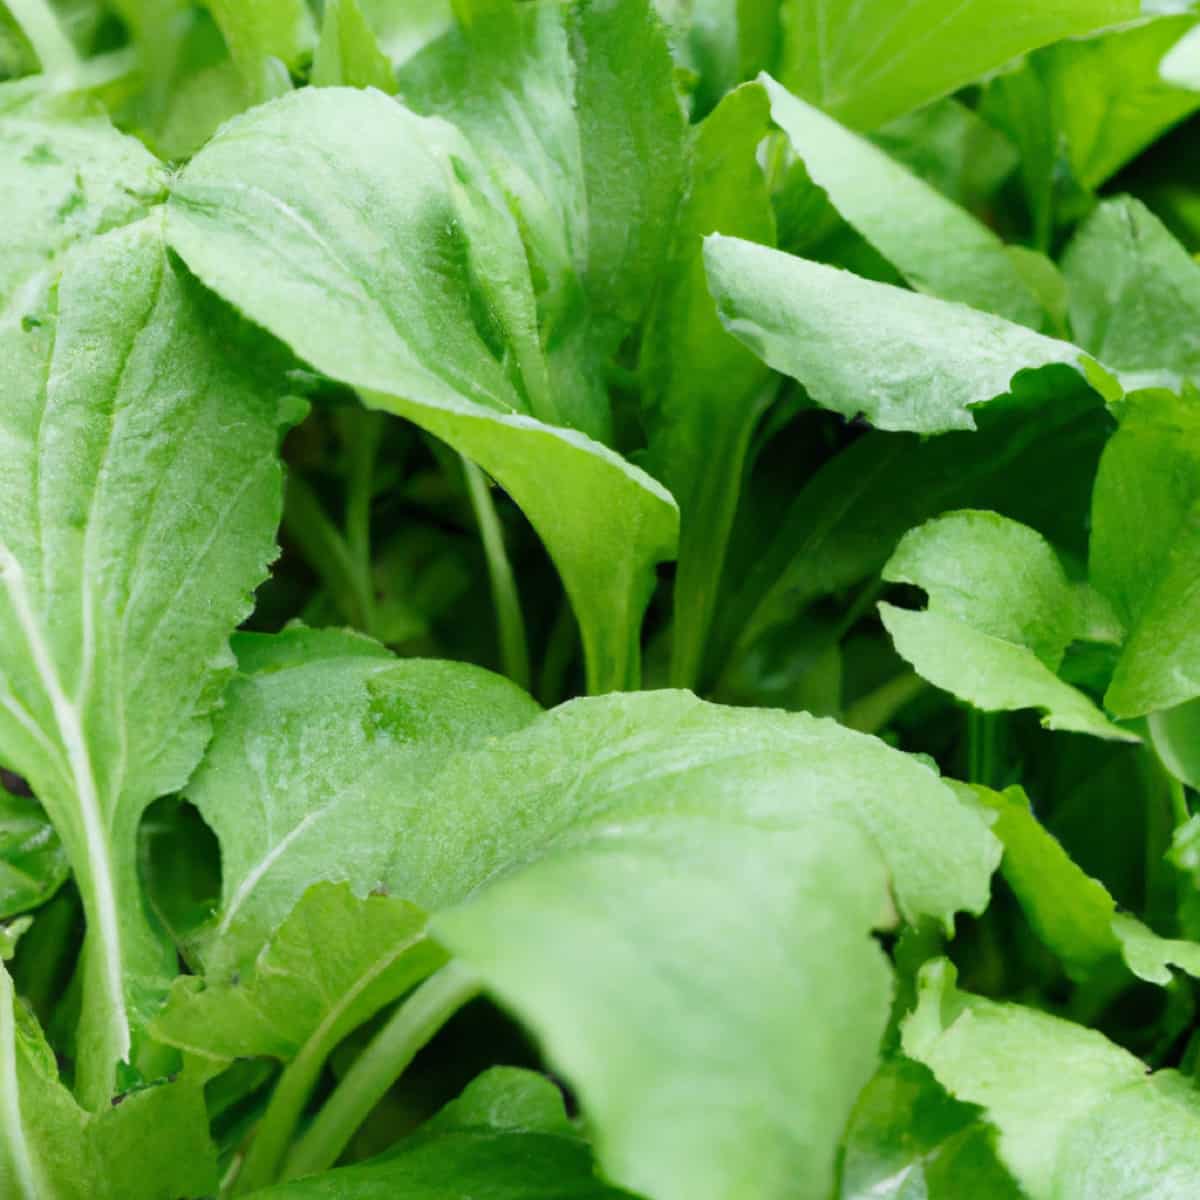 Common Problems With Mustard Greens2